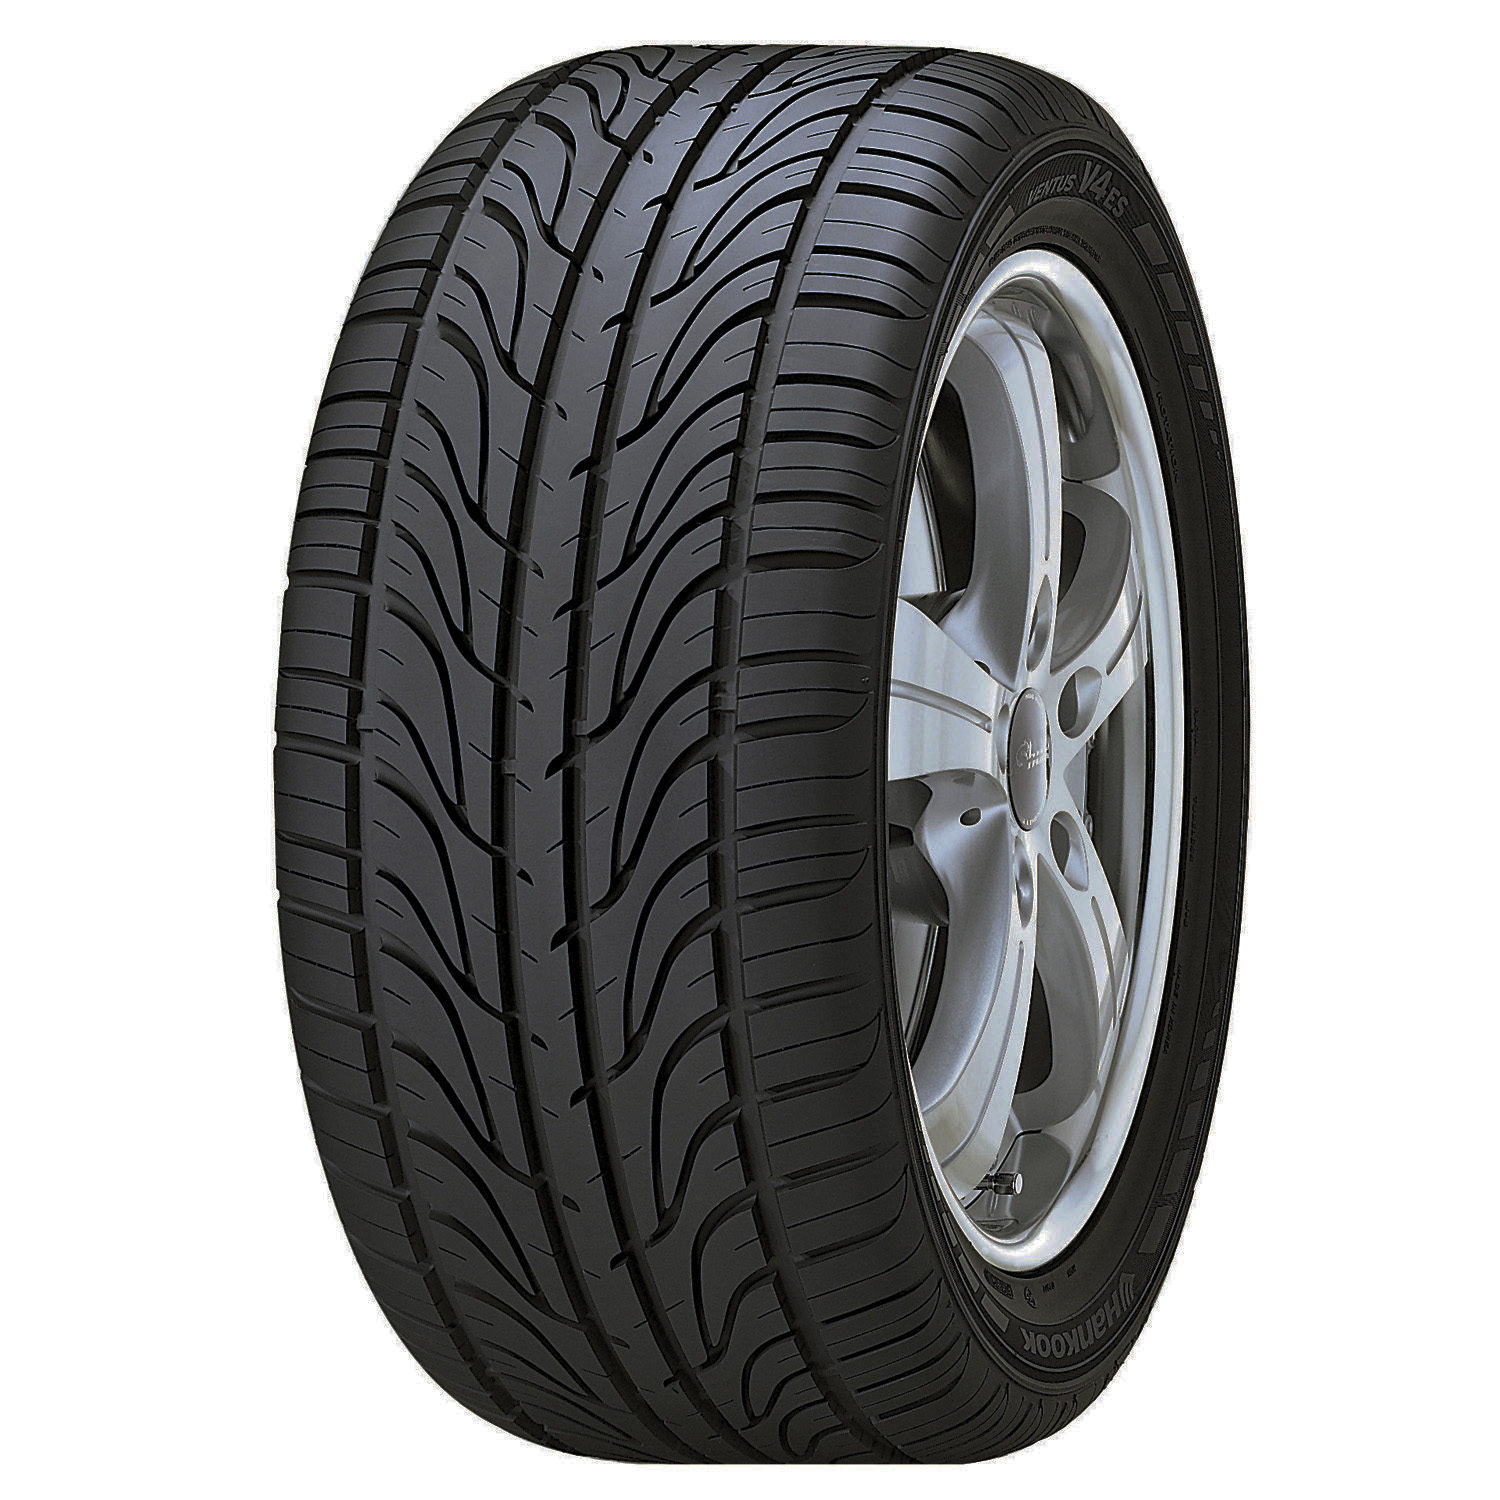 Hankook Ventus V4 ES H105 - 215/55ZR17 94W BW - All Season Tire | Shop Your Way: Online Shopping Can I Use 215/55r17 Instead Of 215/50r17